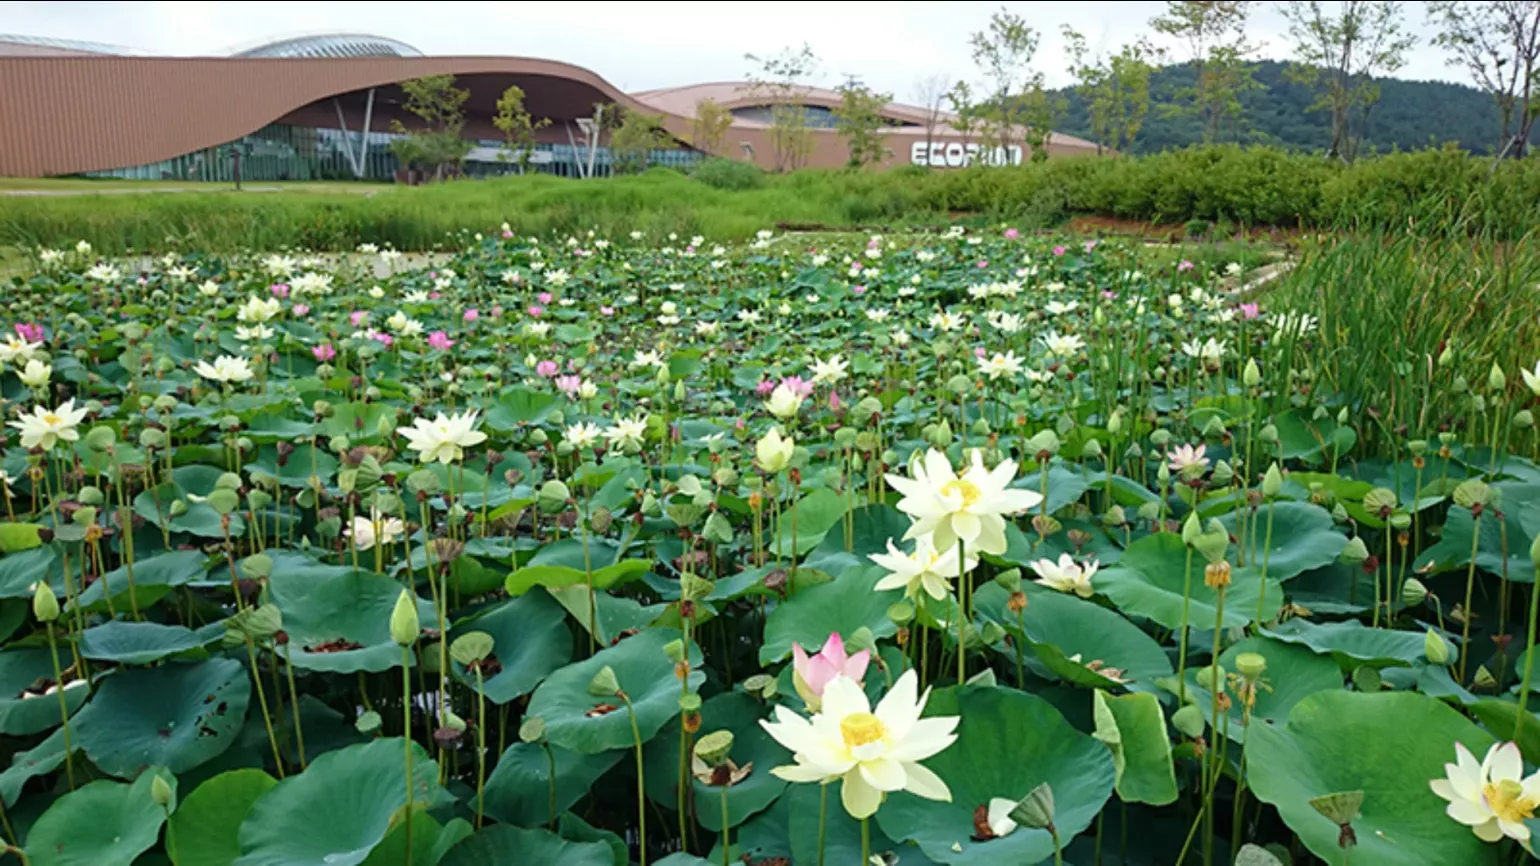 A body of water with a large number of lotus flowers and leaves growing